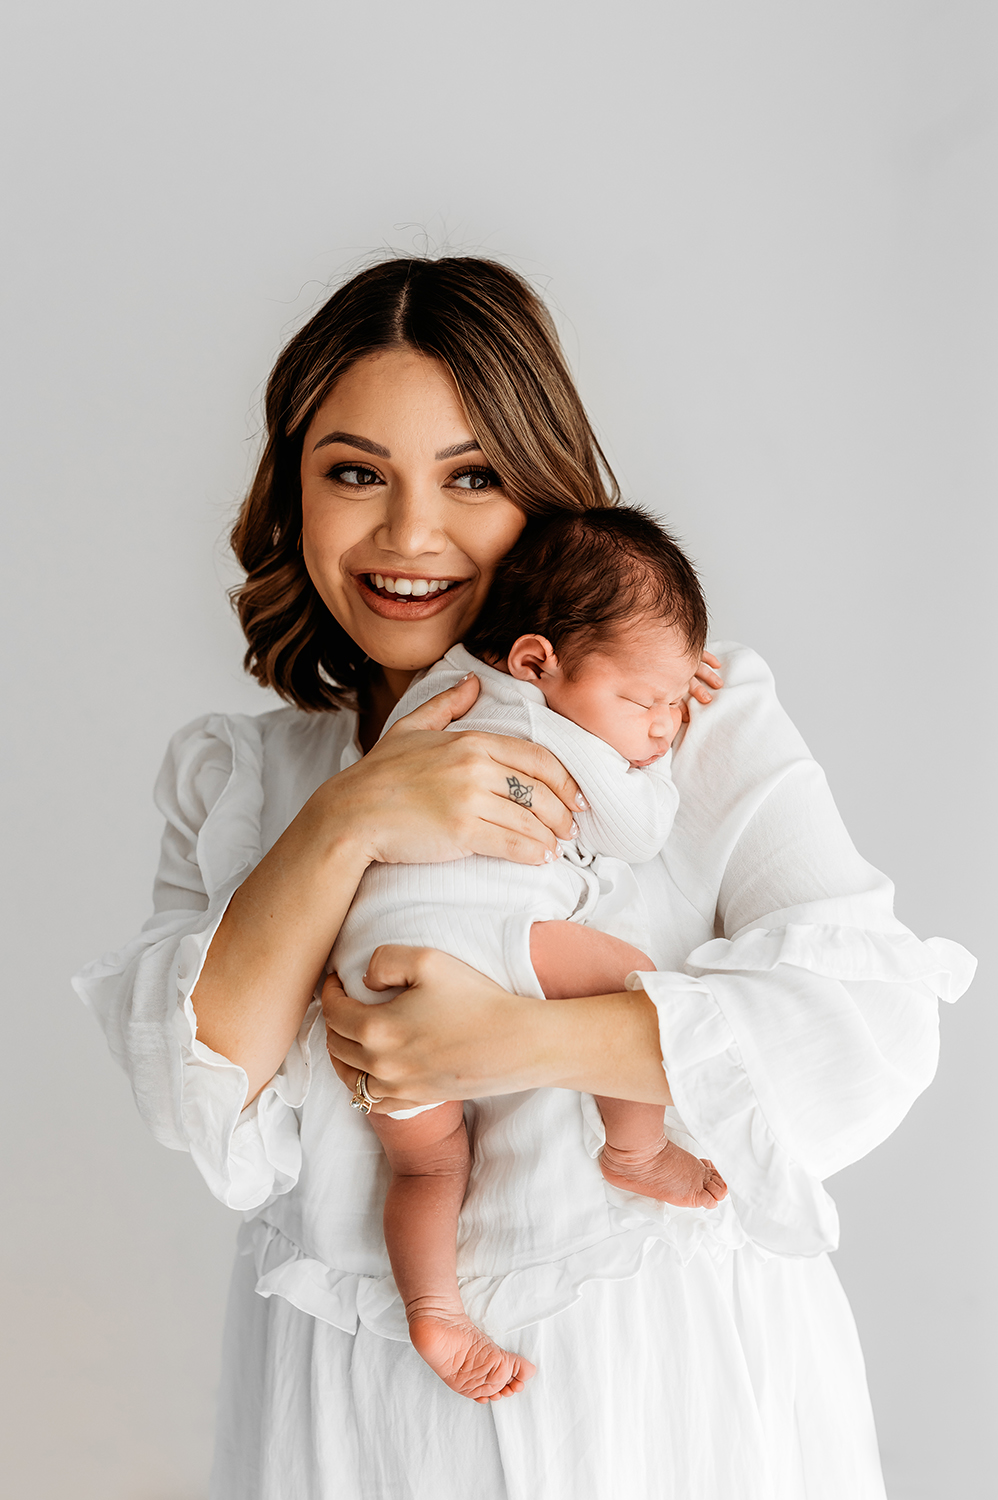 mum smiling holding baby showcasing dress for the what to wear to a newborn & baby photo shoot guide